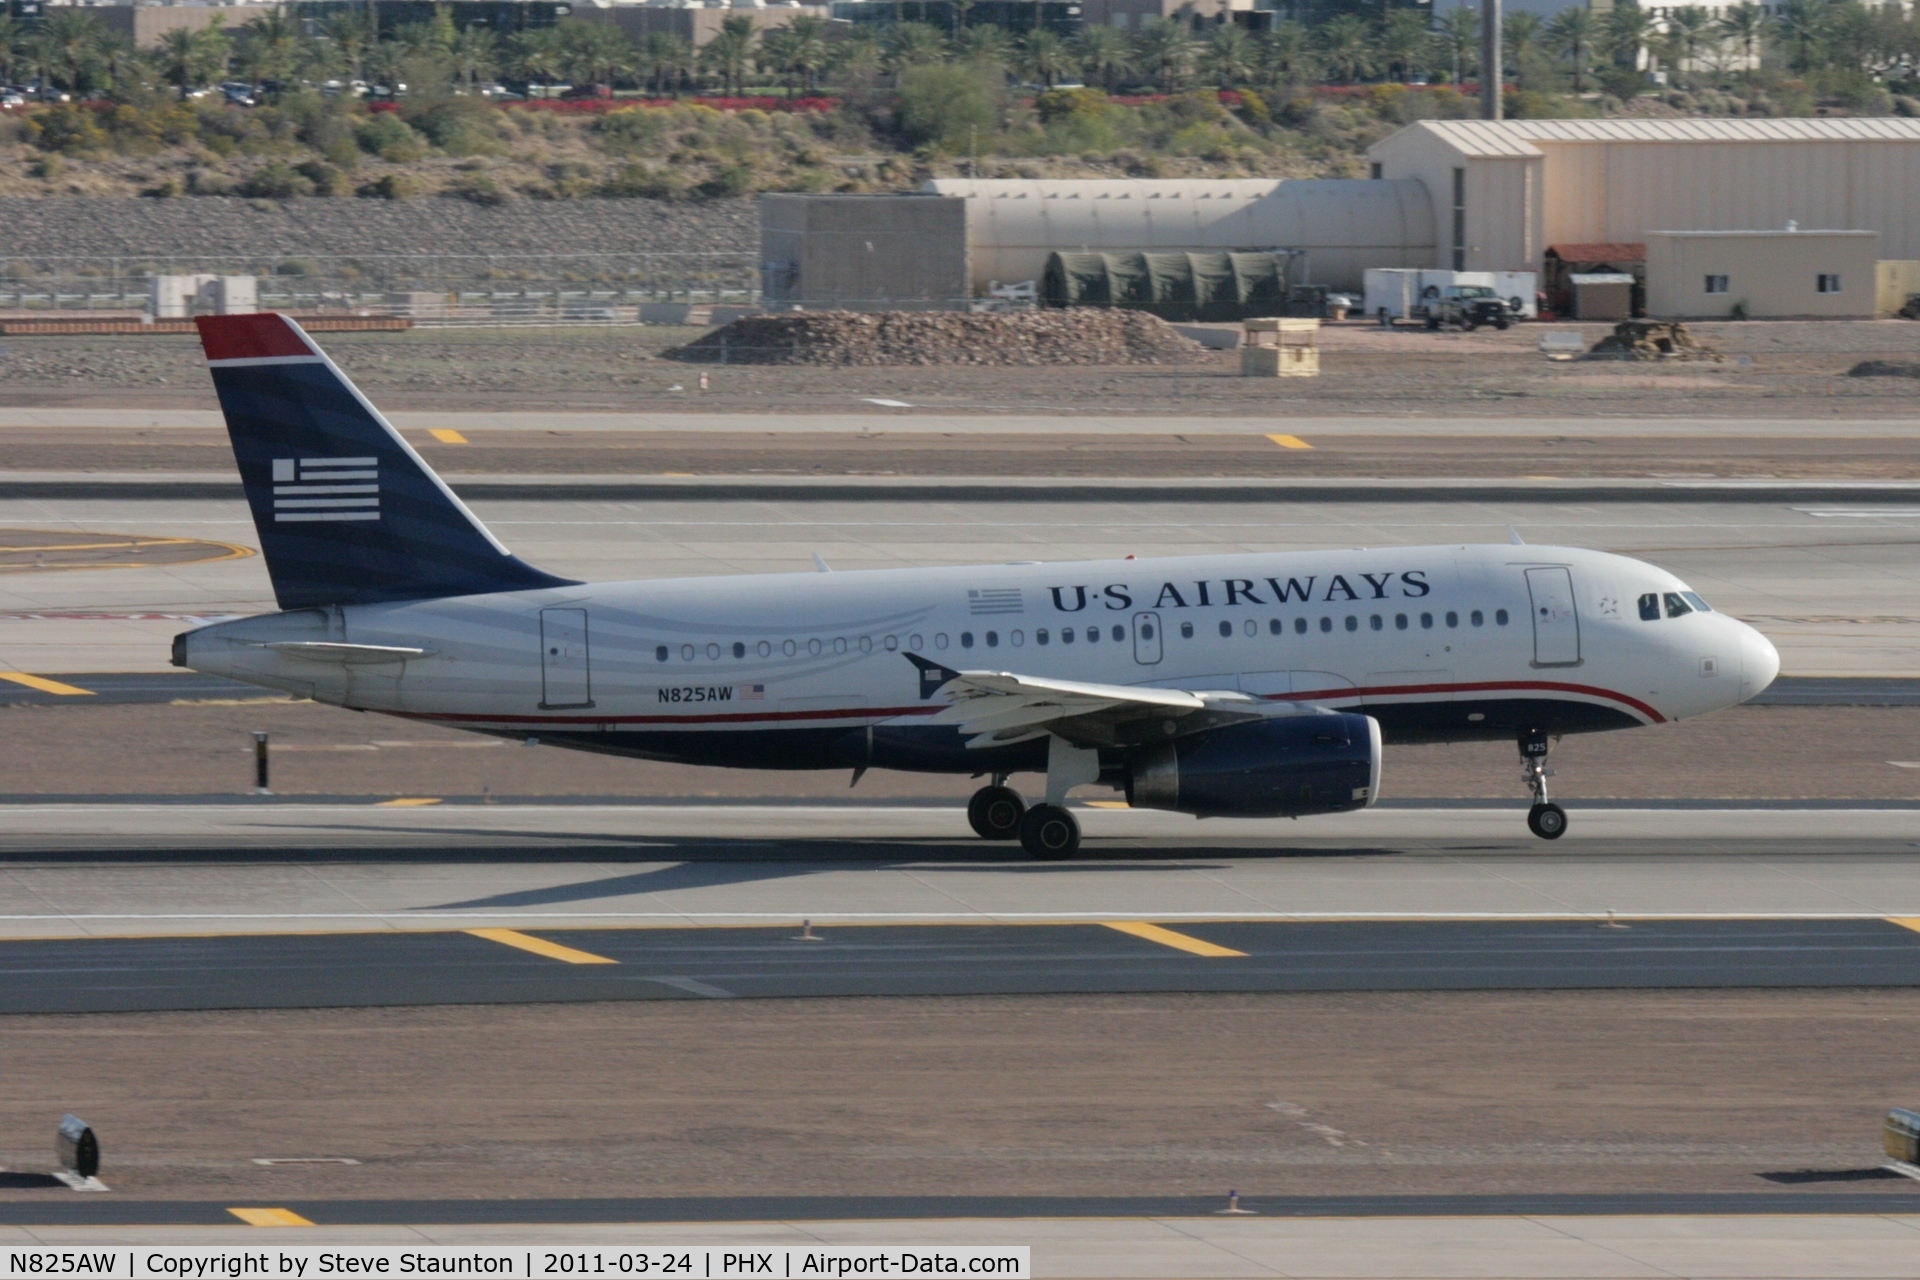 N825AW, 2001 Airbus A319-132 C/N 1527, Taken at Phoenix Sky Harbor Airport, in March 2011 whilst on an Aeroprint Aviation tour